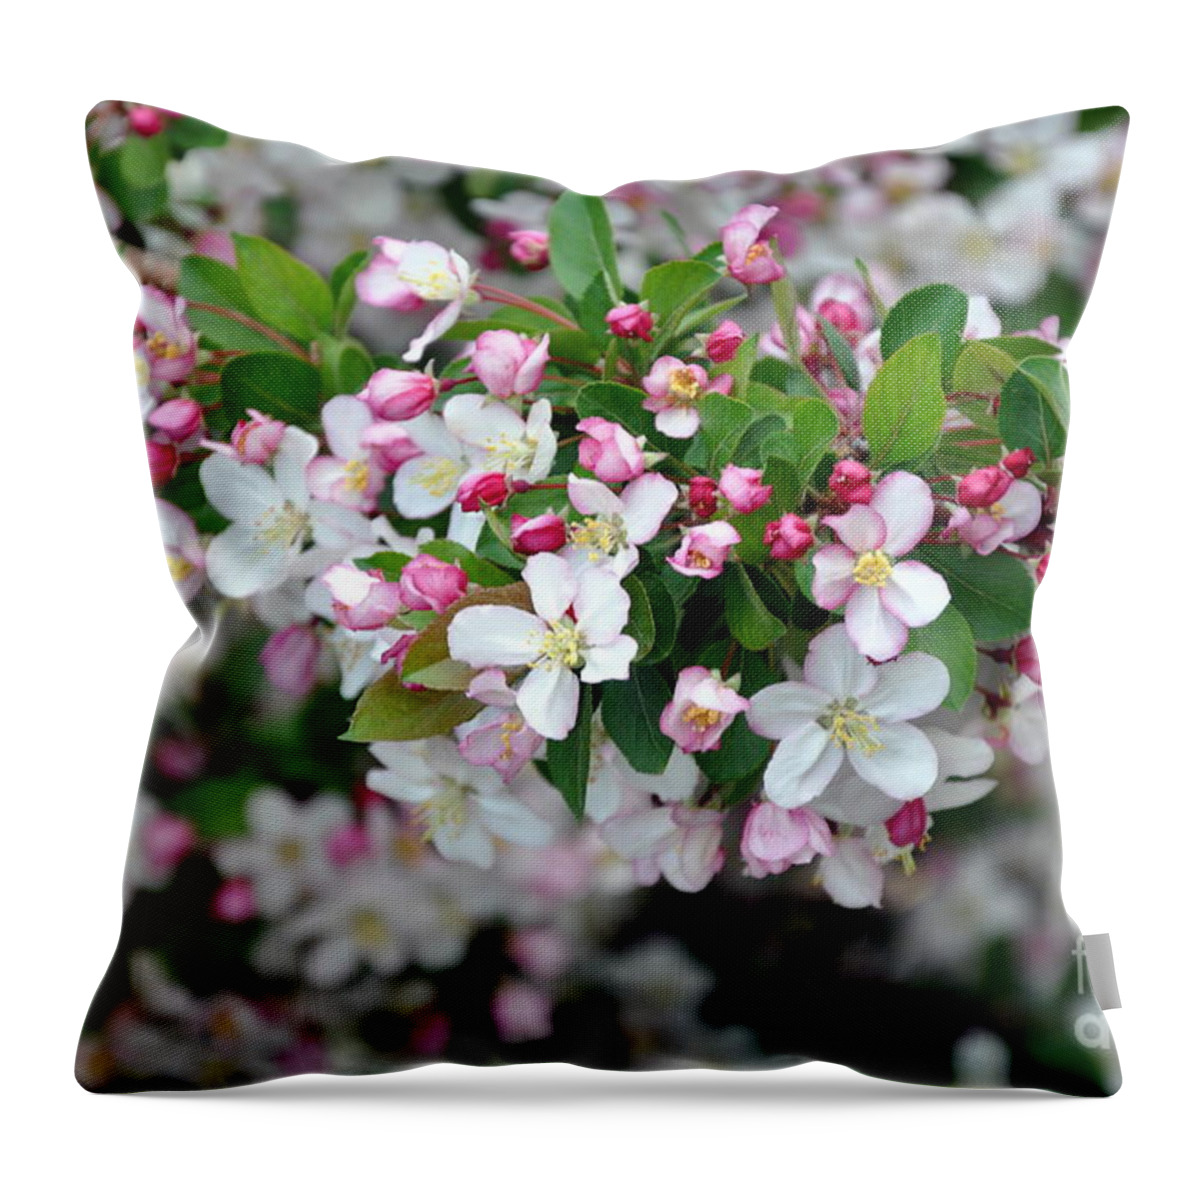 Blossoms Throw Pillow featuring the photograph Blossoms on Blossoms by Dorrene BrownButterfield